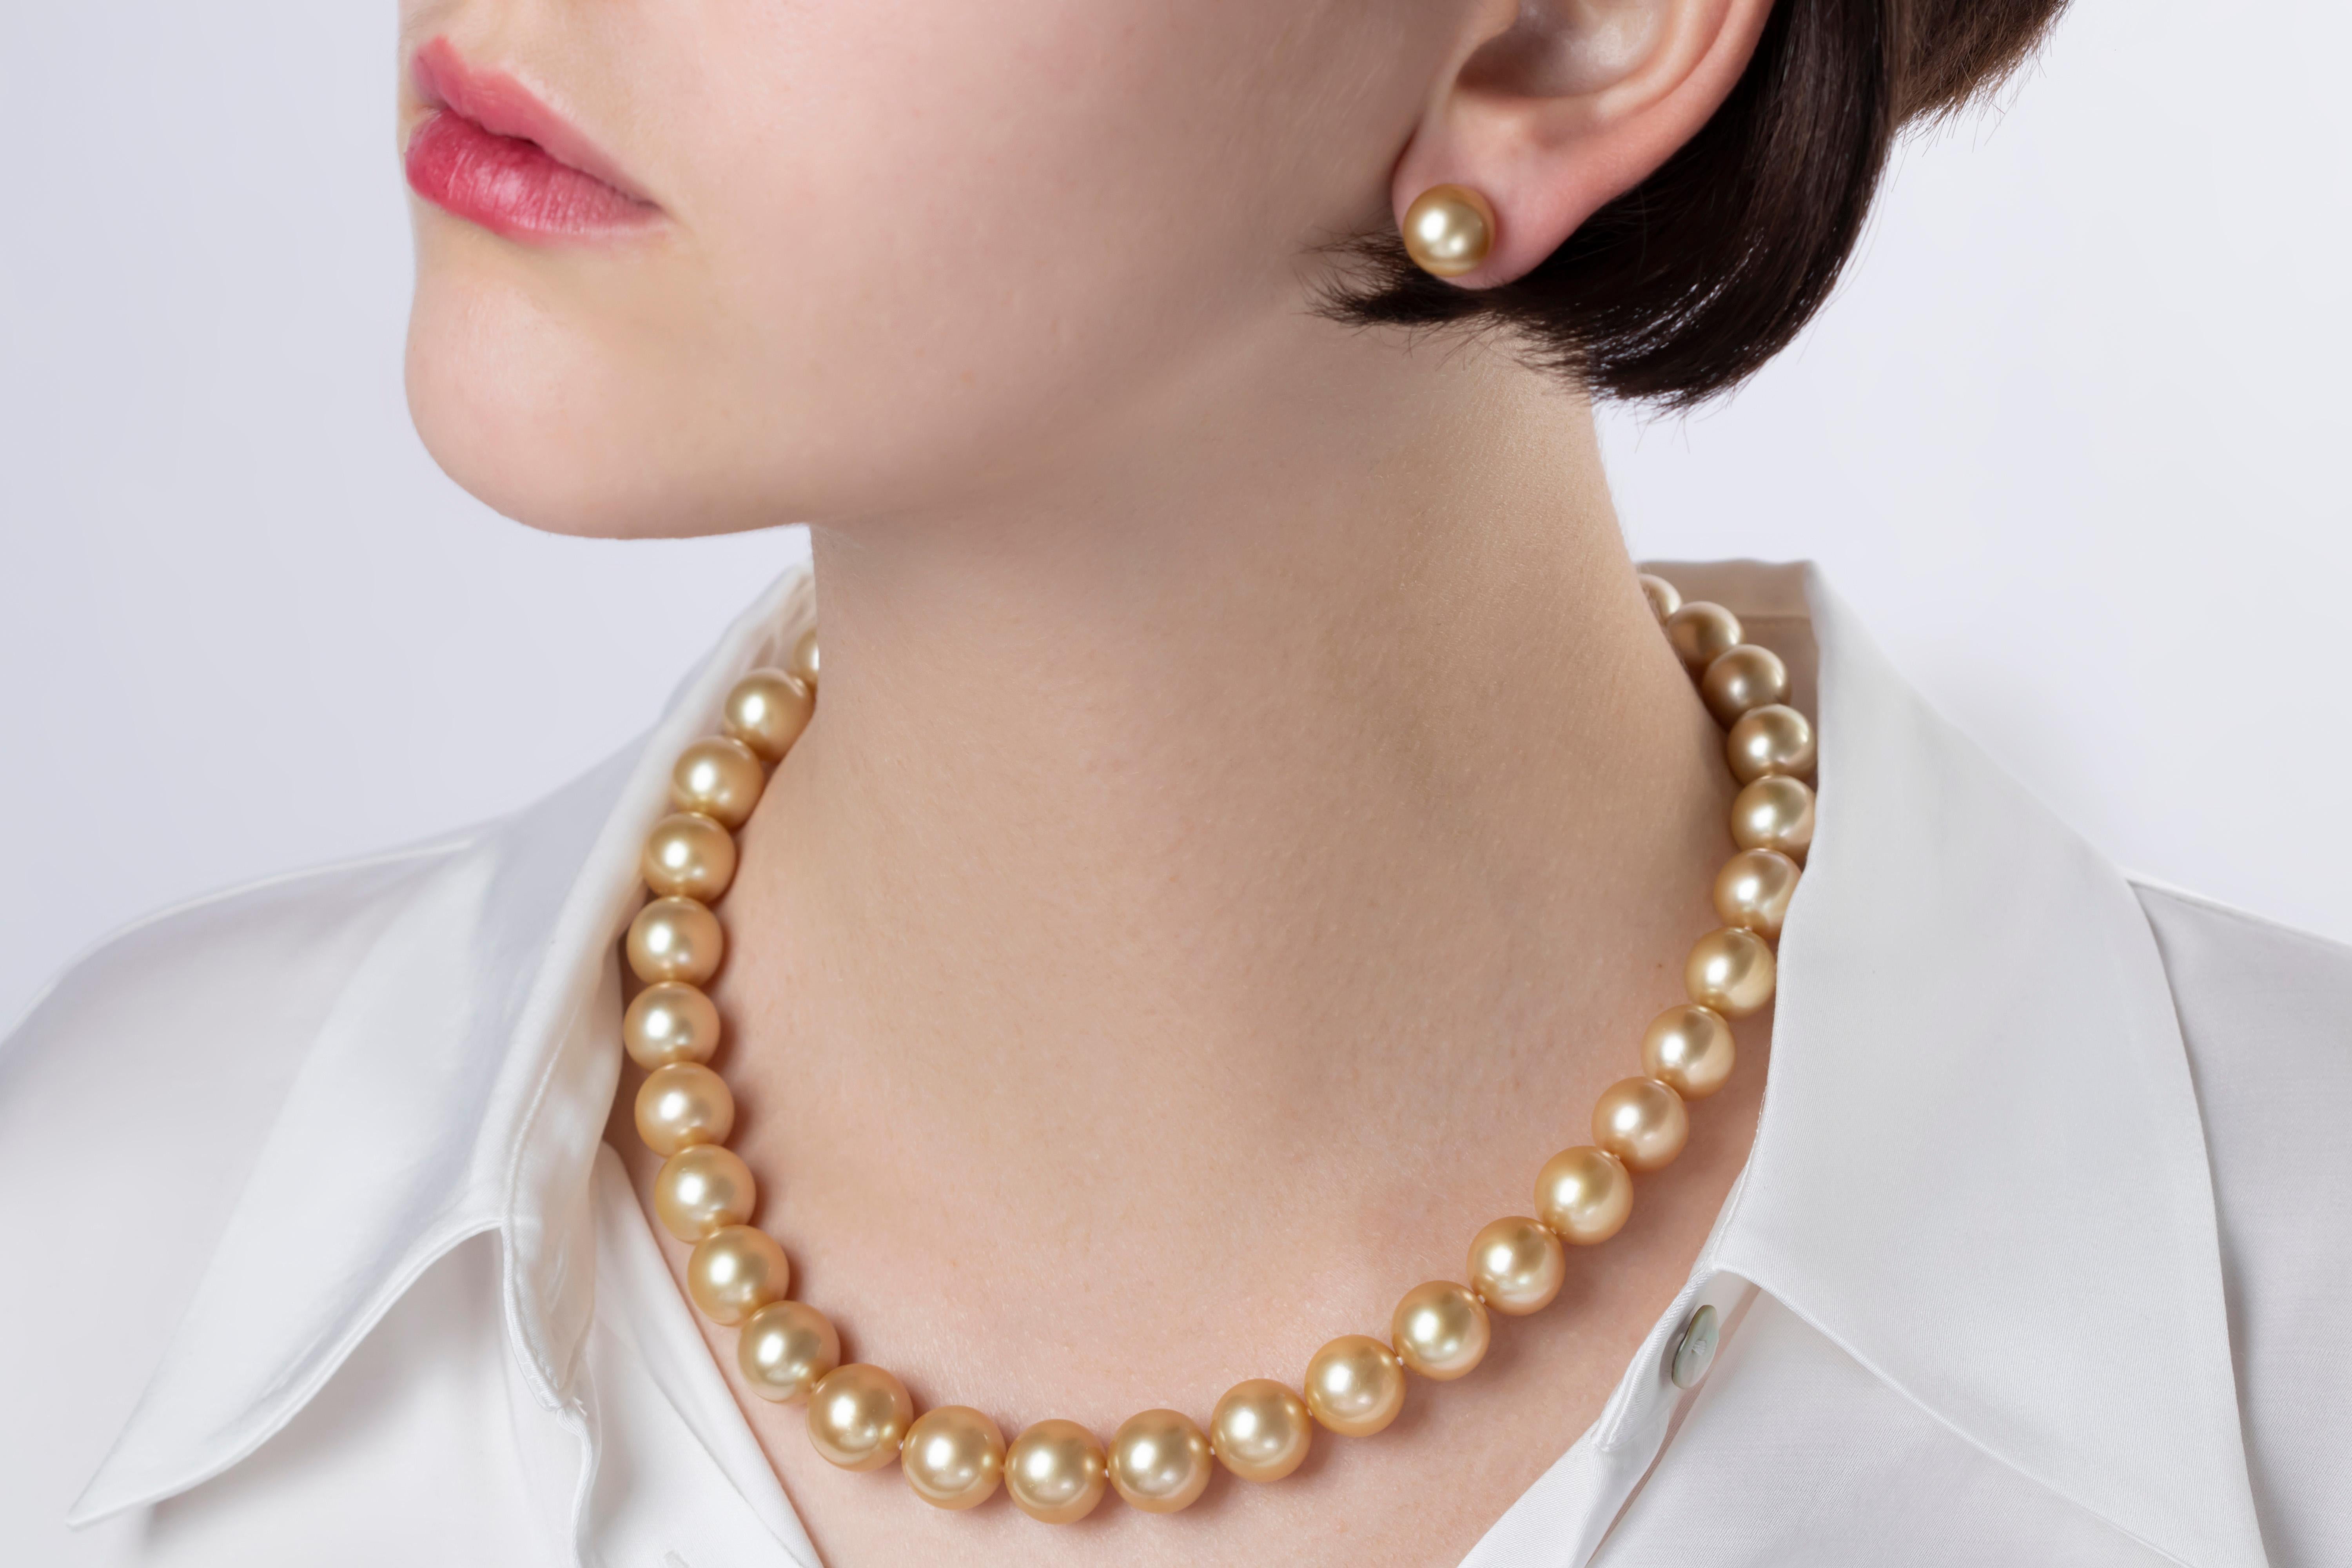 Comprised of timeless, jewellery box staples, our Classic collection is designed to last through the generations. Featuring vivid Golden South Sea pearls set in 18ct gold, this necklace is both classic and elegant.
Other sizes, qualities and lengths